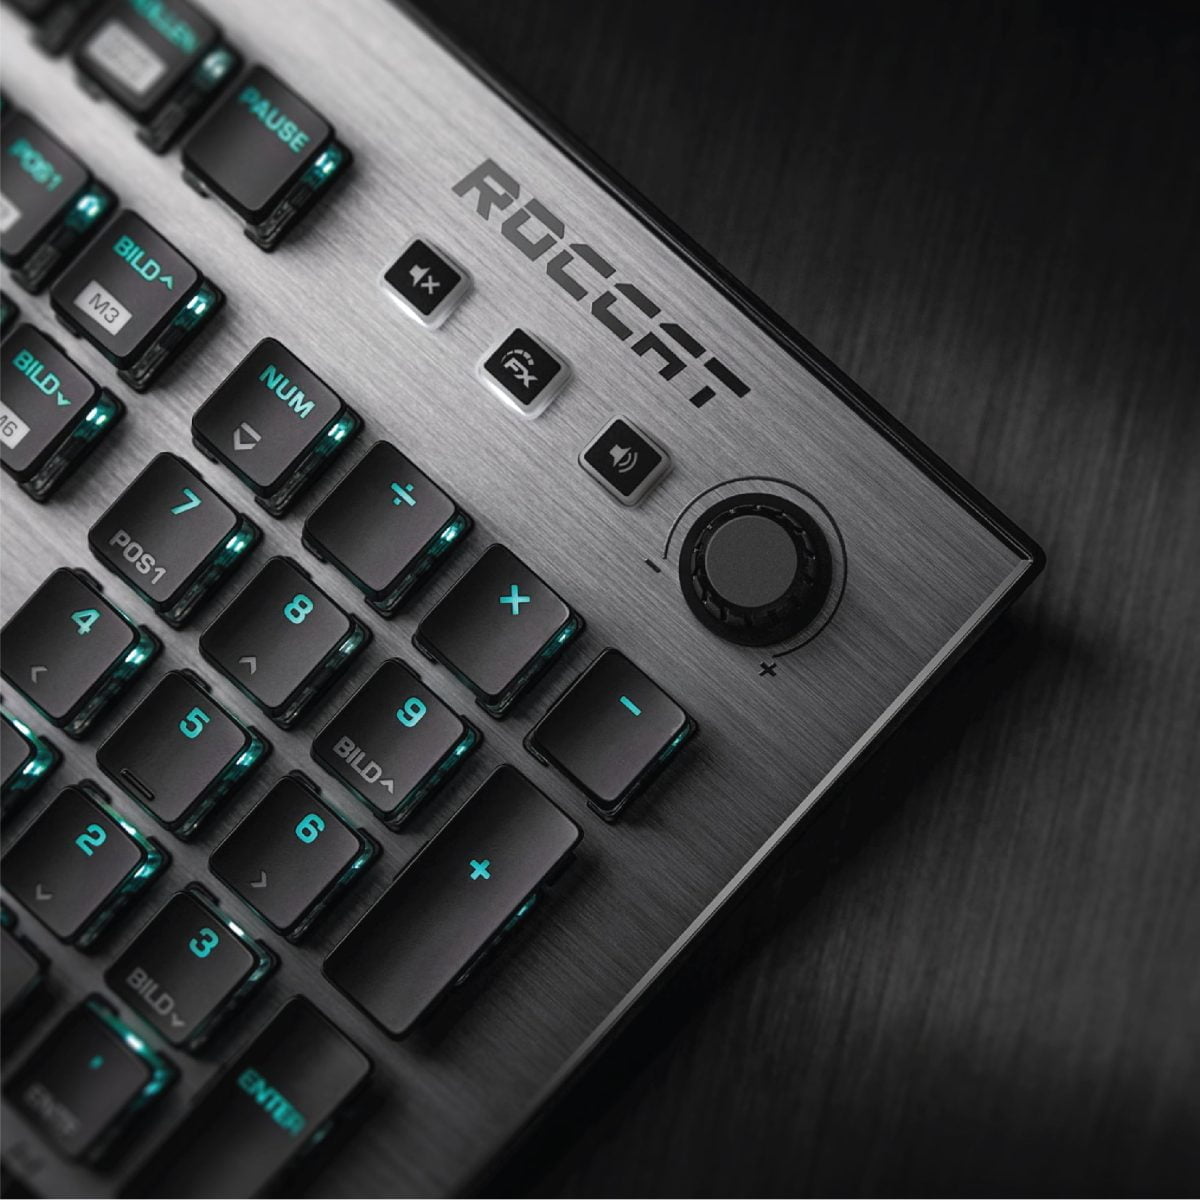 W21 23 Roccat &Lt;Div Id=&Quot;Title_Feature_Div&Quot; Class=&Quot;Feature&Quot; Data-Feature-Name=&Quot;Title&Quot; Data-Cel-Widget=&Quot;Title_Feature_Div&Quot;&Gt; &Lt;Div Id=&Quot;Titlesection&Quot; Class=&Quot;A-Section A-Spacing-None&Quot;&Gt; &Lt;P Id=&Quot;Title&Quot; Class=&Quot;A-Size-Large A-Spacing-None&Quot;&Gt;&Lt;Span Id=&Quot;Producttitle&Quot; Class=&Quot;A-Size-Large&Quot;&Gt;Roccat Vulcan 120 Aimo, Tactile, Silent Switch, Us Layout, Eu Packaging&Lt;/Span&Gt;&Lt;/P&Gt; &Lt;Div Id=&Quot;Main_Textcontent&Quot;&Gt; &Lt;Div Class=&Quot;Contentrow&Quot;&Gt; &Lt;Div Class=&Quot;Copytext&Quot;&Gt;The Vulcan Is A Precision Gaming Tool That Lets You Sense Its Performance From The First Glance And The First Key Stroke. Developed Following The Renowned Principles Of German Design And Engineering, It Is The Best Keyboard Roccat Has Ever Built.&Lt;/Div&Gt; &Lt;/Div&Gt; &Lt;/Div&Gt; &Lt;Div Id=&Quot;Thumbnail_Gallery&Quot;&Gt; &Lt;Div Class=&Quot;Fullwidthrow&Quot;&Gt; &Lt;Div Class=&Quot;Gallery&Quot;&Gt; &Lt;Div Class=&Quot;Gallerydisplay&Quot;&Gt; &Nbsp; &Lt;/Div&Gt; &Lt;/Div&Gt; &Lt;/Div&Gt; &Lt;/Div&Gt; &Lt;/Div&Gt; &Lt;/Div&Gt; Roccat Roccat Vulcan 120 Aimo Mechanical Gaming Keyboard